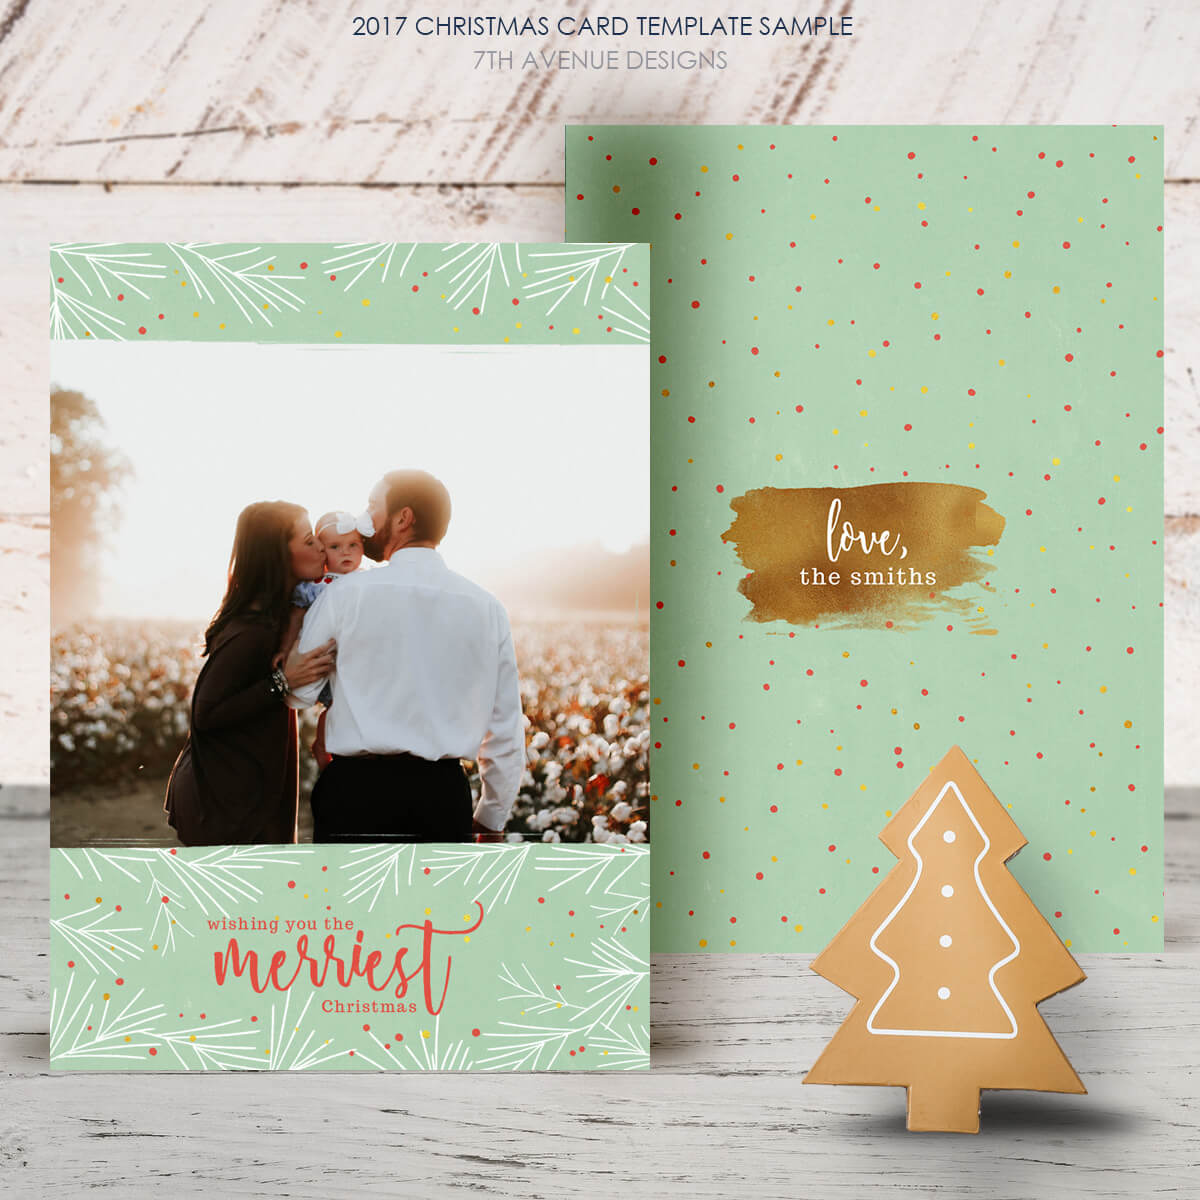 Free Christmas Card 2017 [Freecc2017] - It's Free Pertaining To Free Christmas Card Templates For Photographers